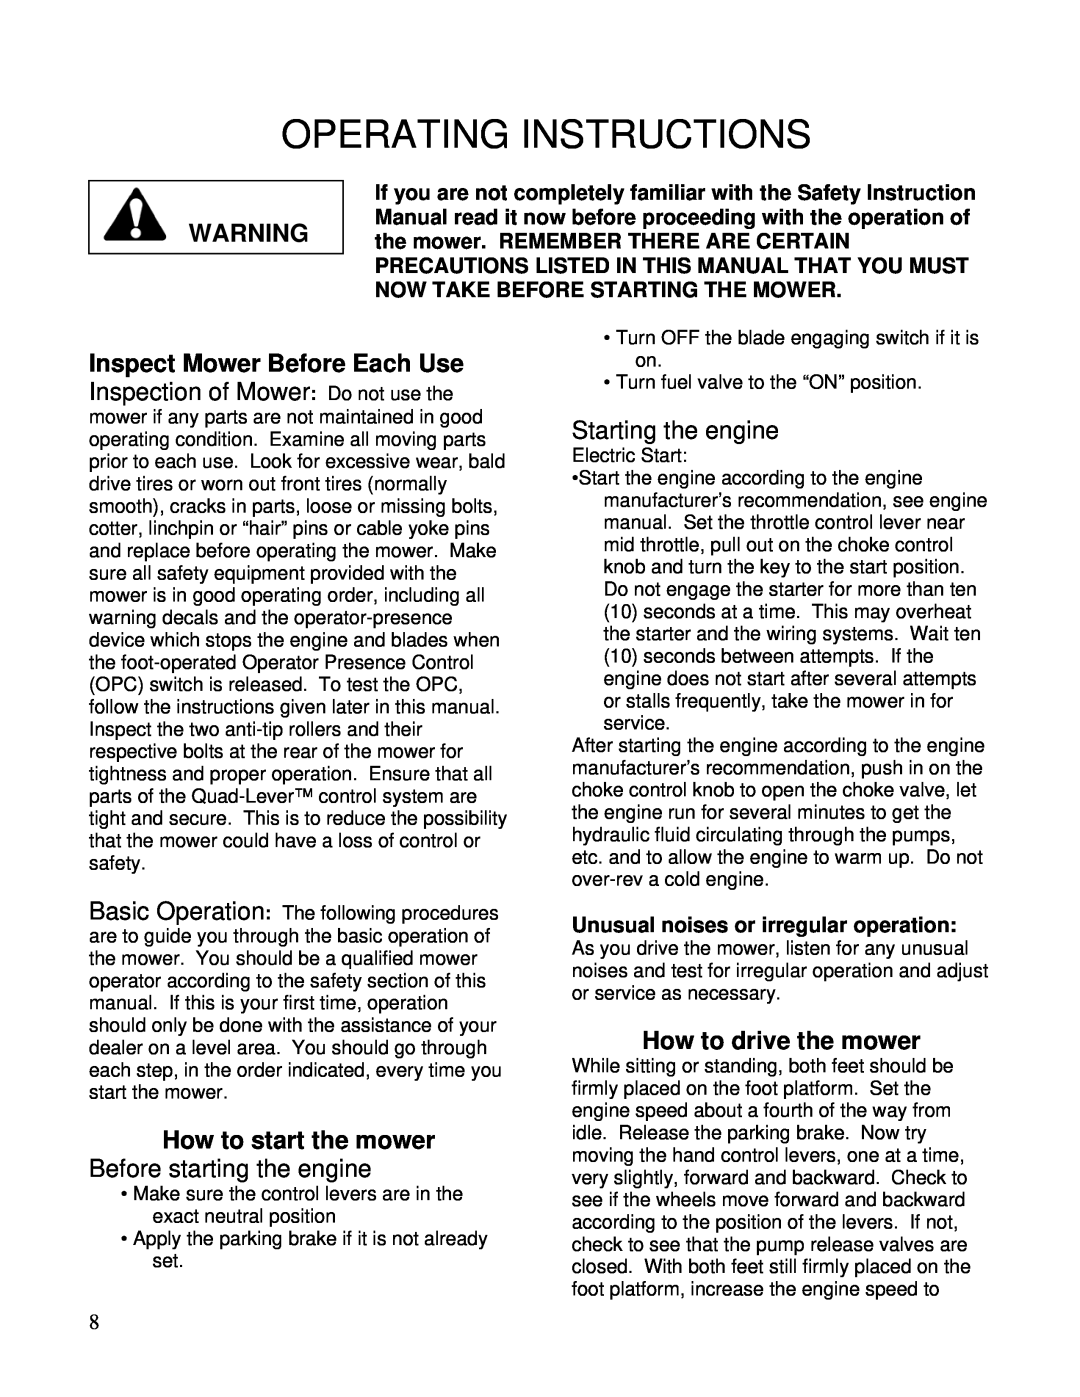 Wright Manufacturing 26077 Operating Instructions, How to start the mower, Before starting the engine, Starting the engine 